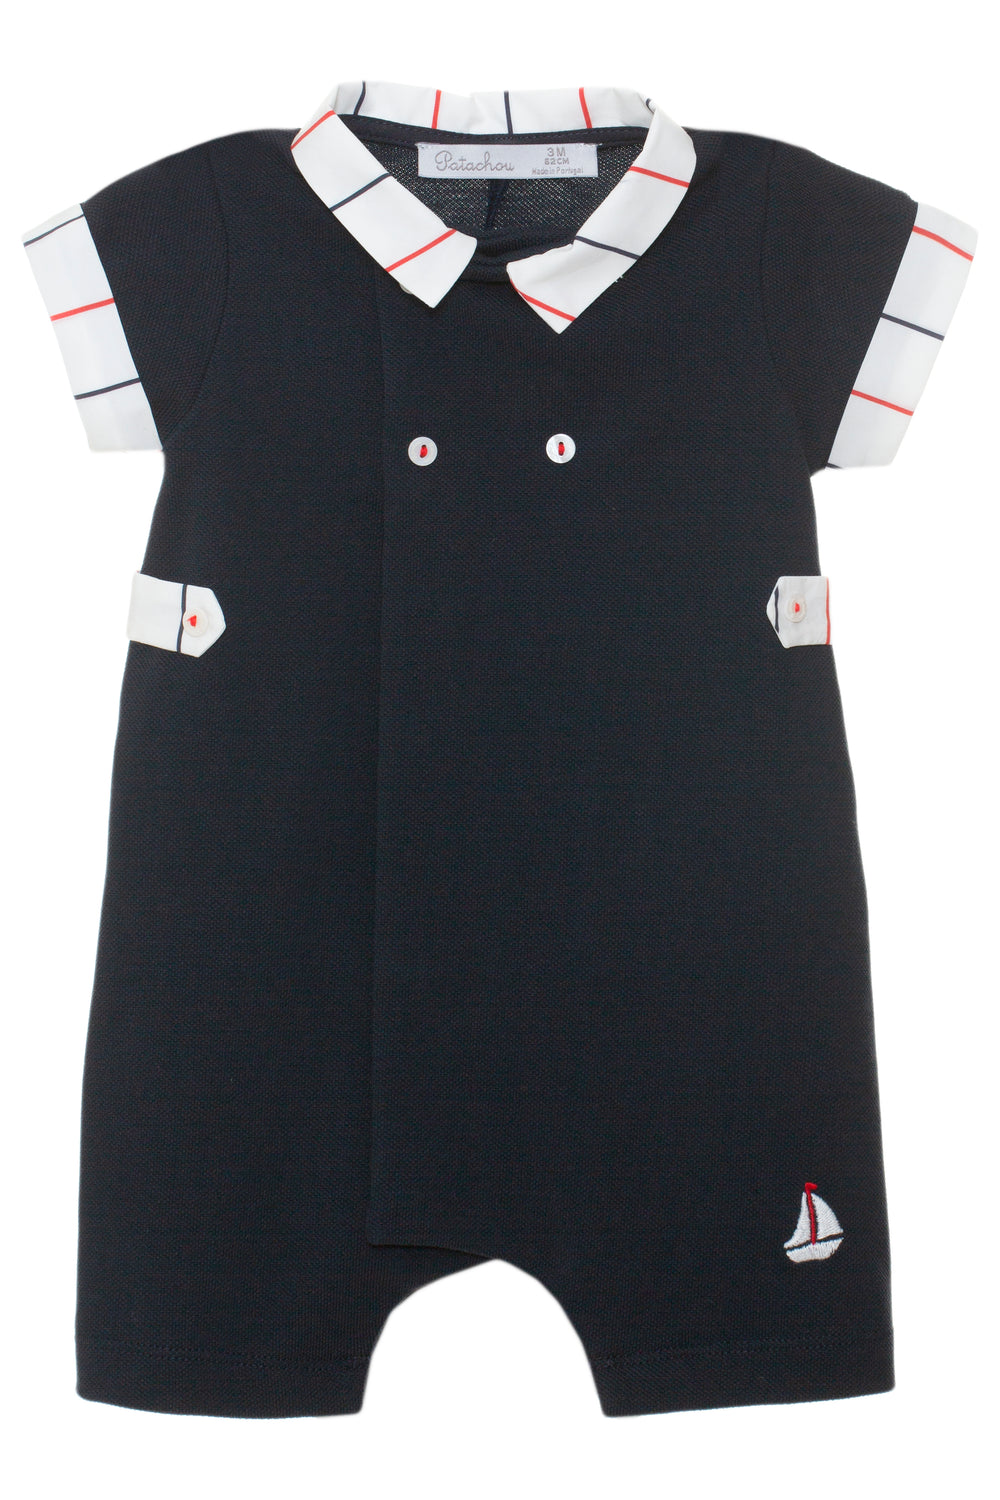 Patachou "Carter" Navy Polo Romper | Millie and John